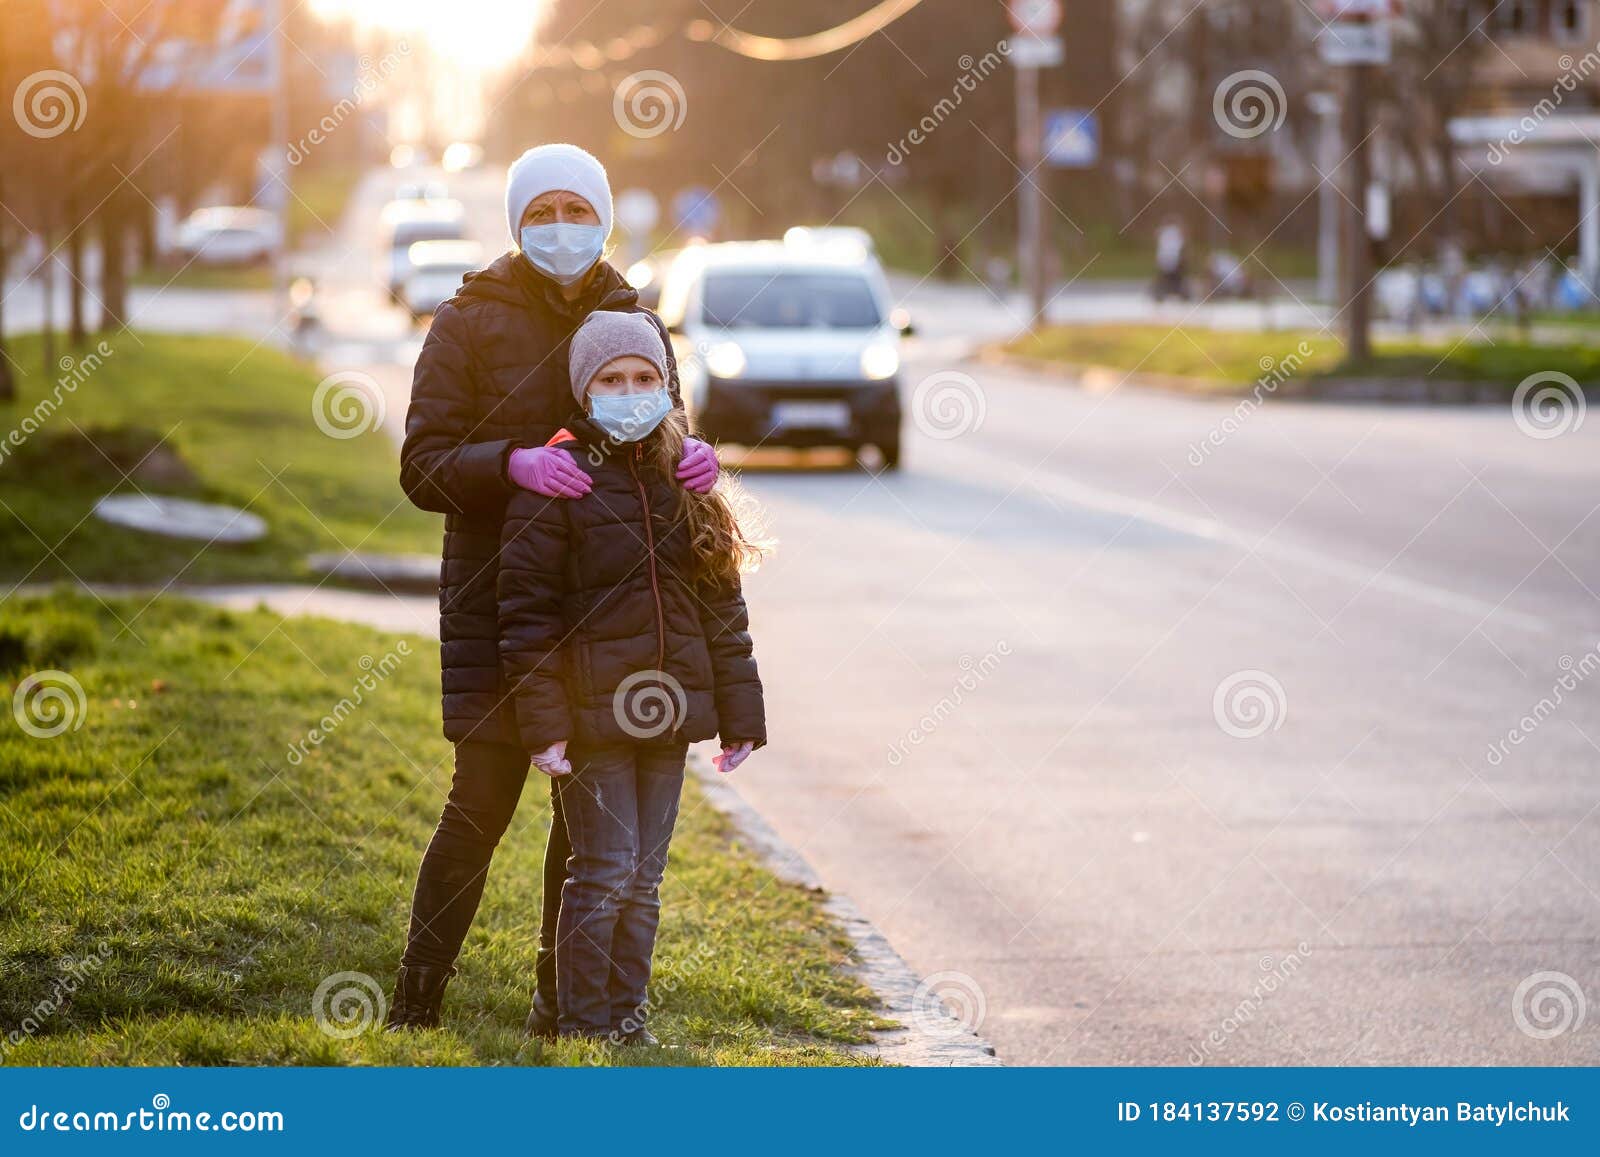 Mother Adjusts Her Daughters Medical Mask On The Street Of A European